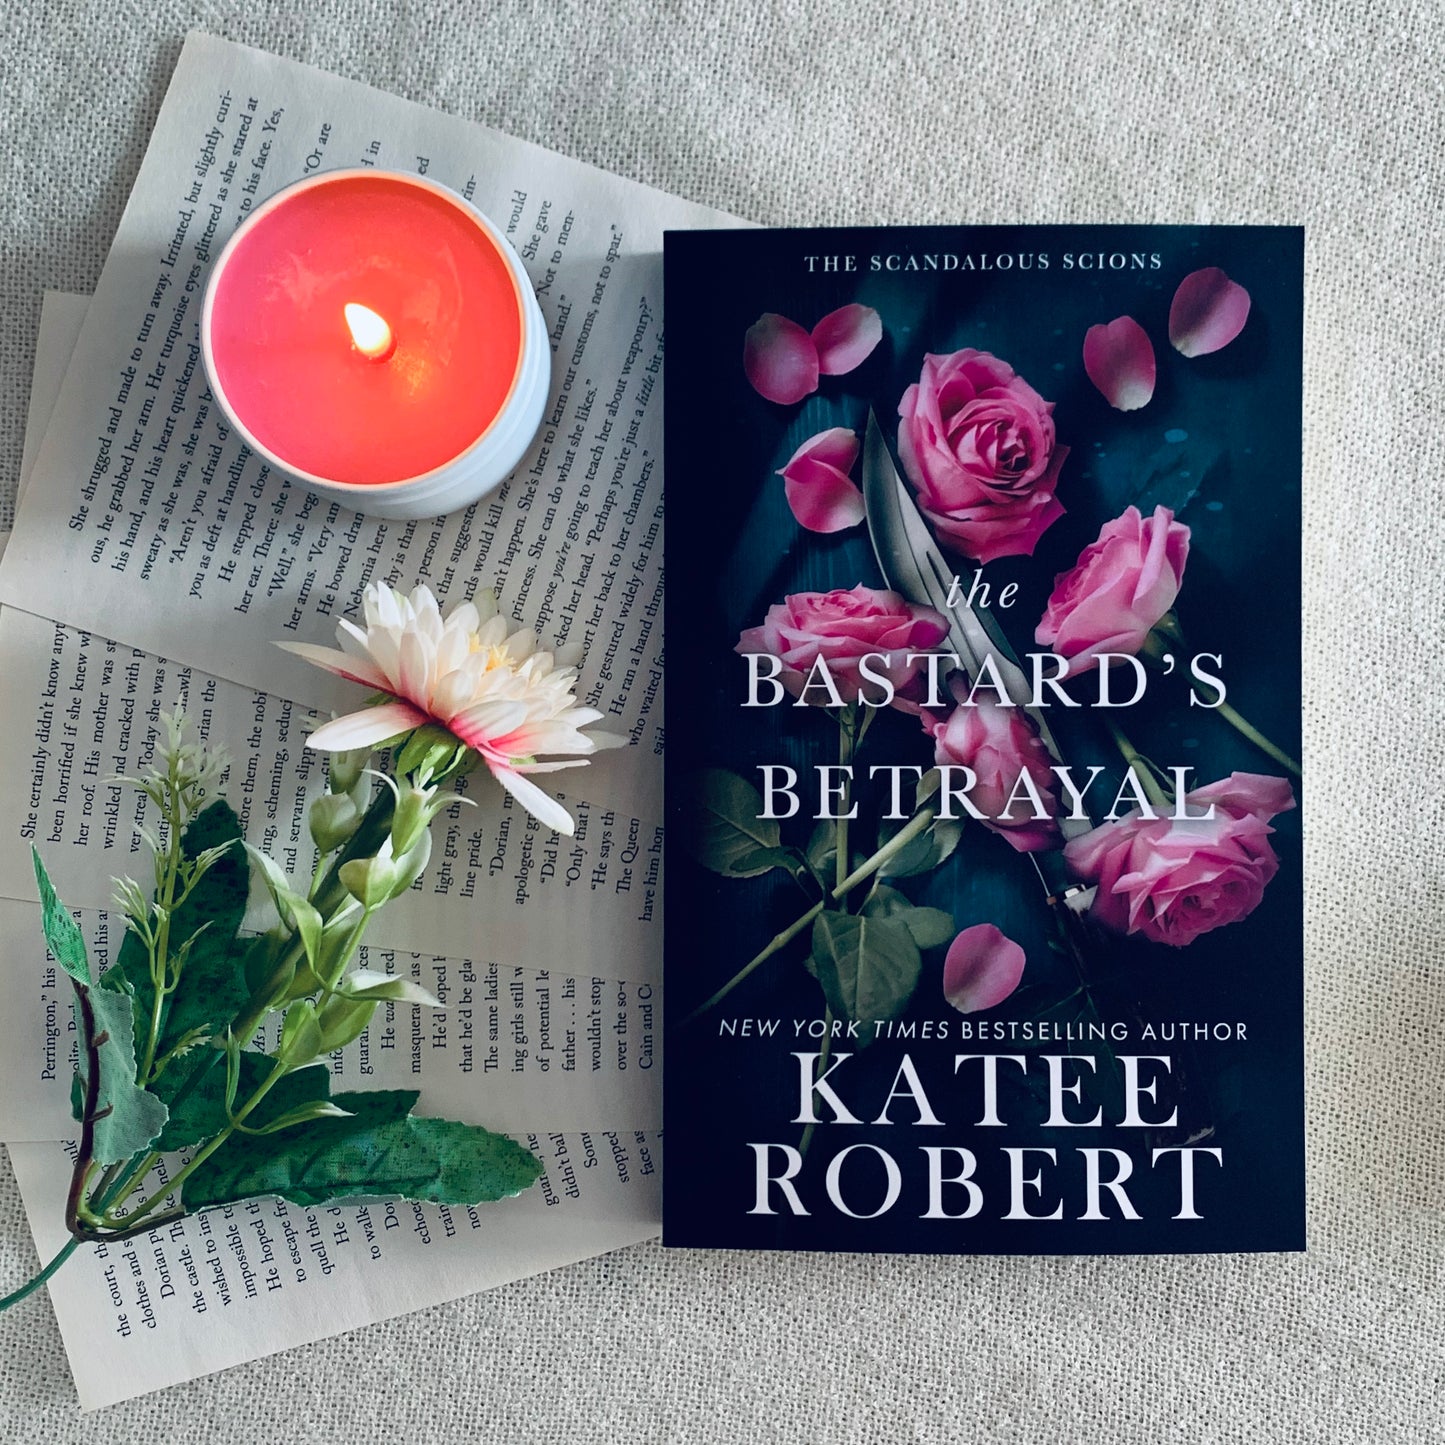 The Bastard’s Betrayal - Special Edition by Katee Robert